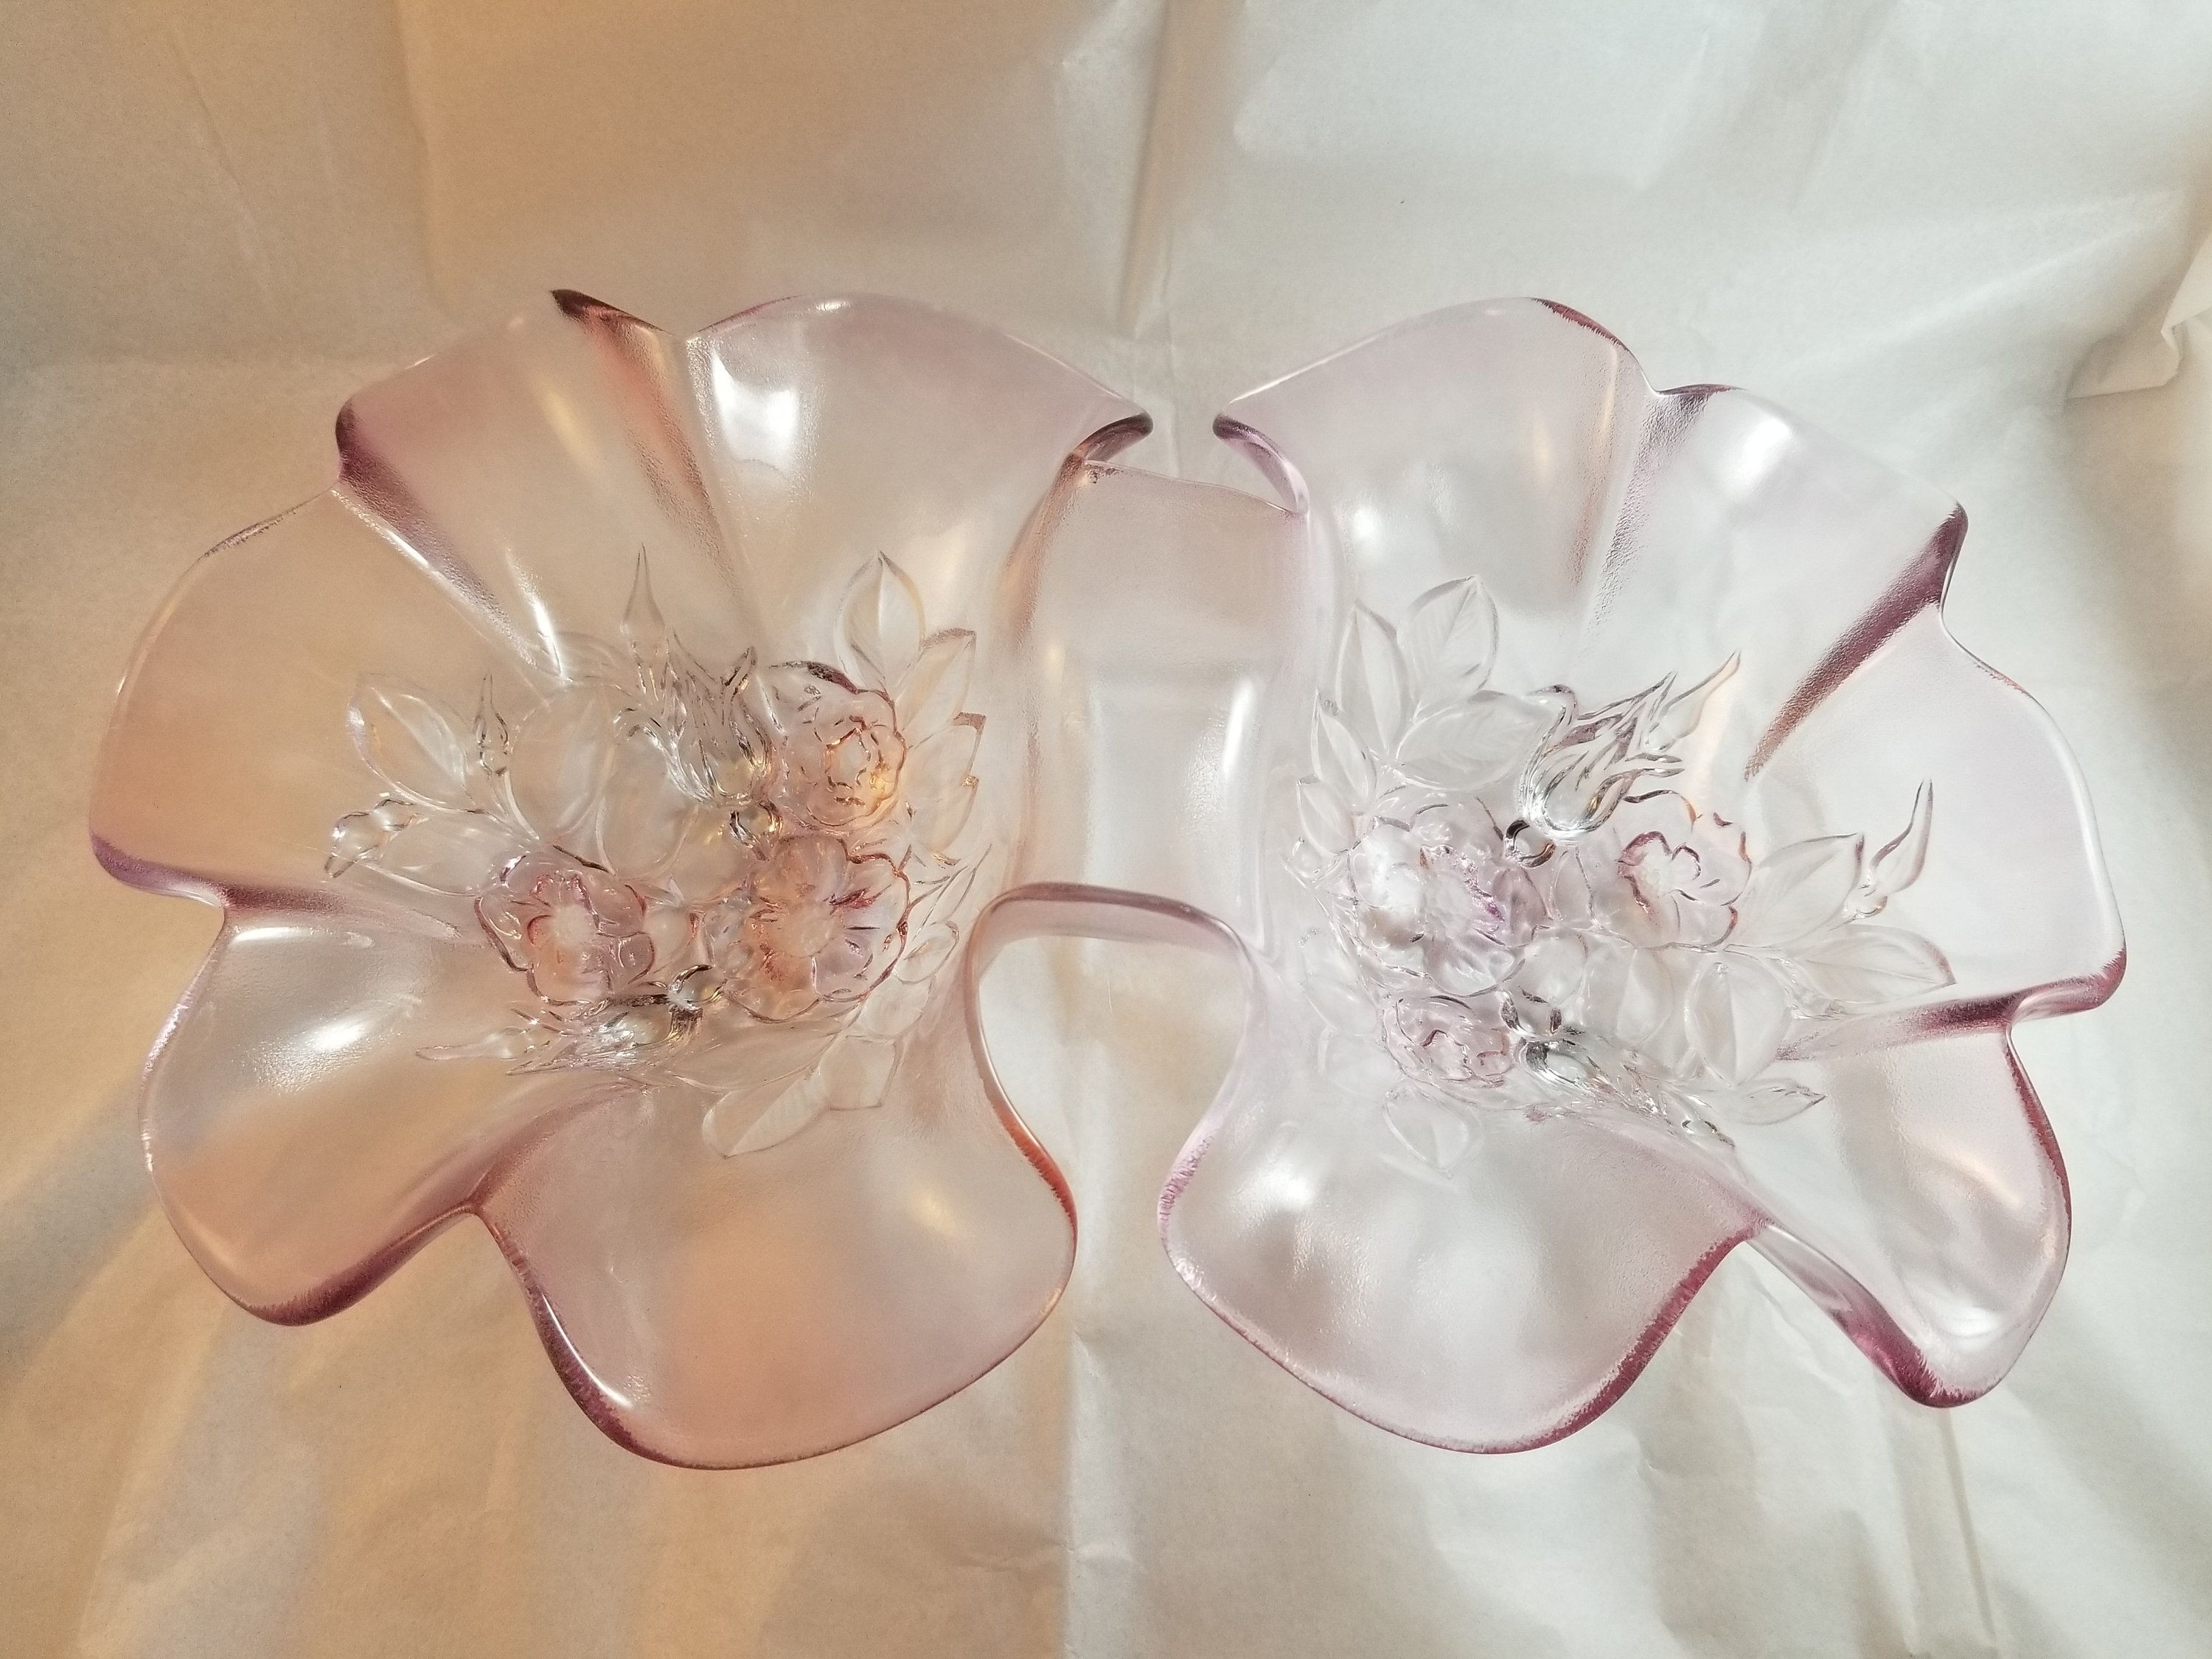 30 Famous Mikasa Vases and Bowls 2024 free download mikasa vases and bowls of vintage mikasa crystal rosella pink frosted flowers double serving regarding excited to share the latest addition to my etsy shop vintage mikasa crystal rosella